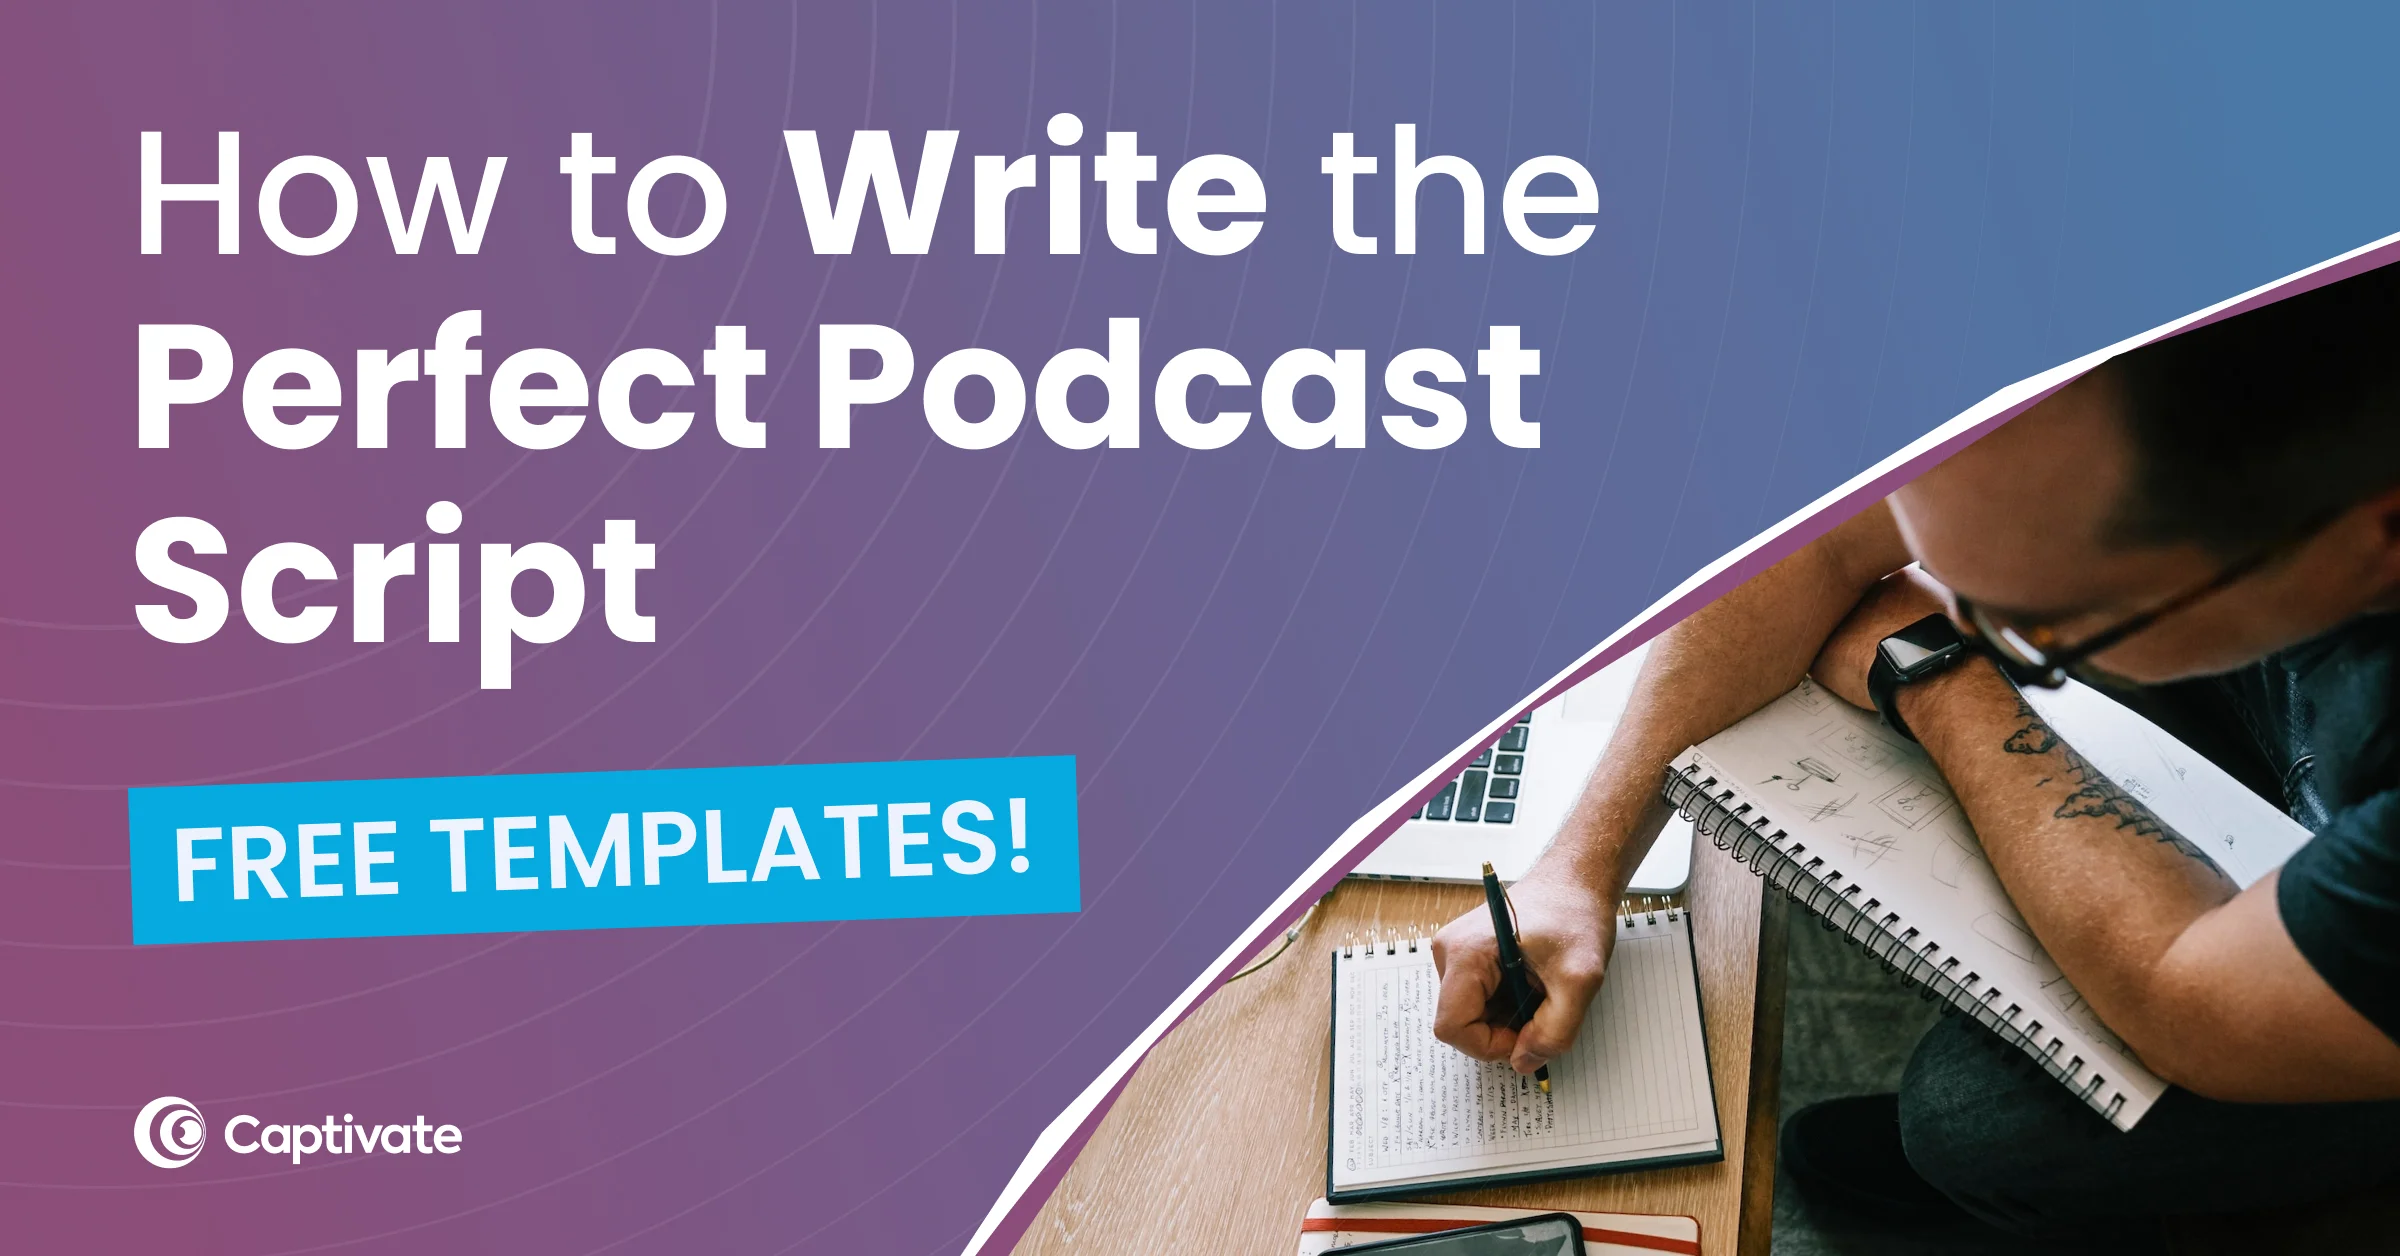 Podcast Transcripts: Why and How to Transcribe Your Podcast